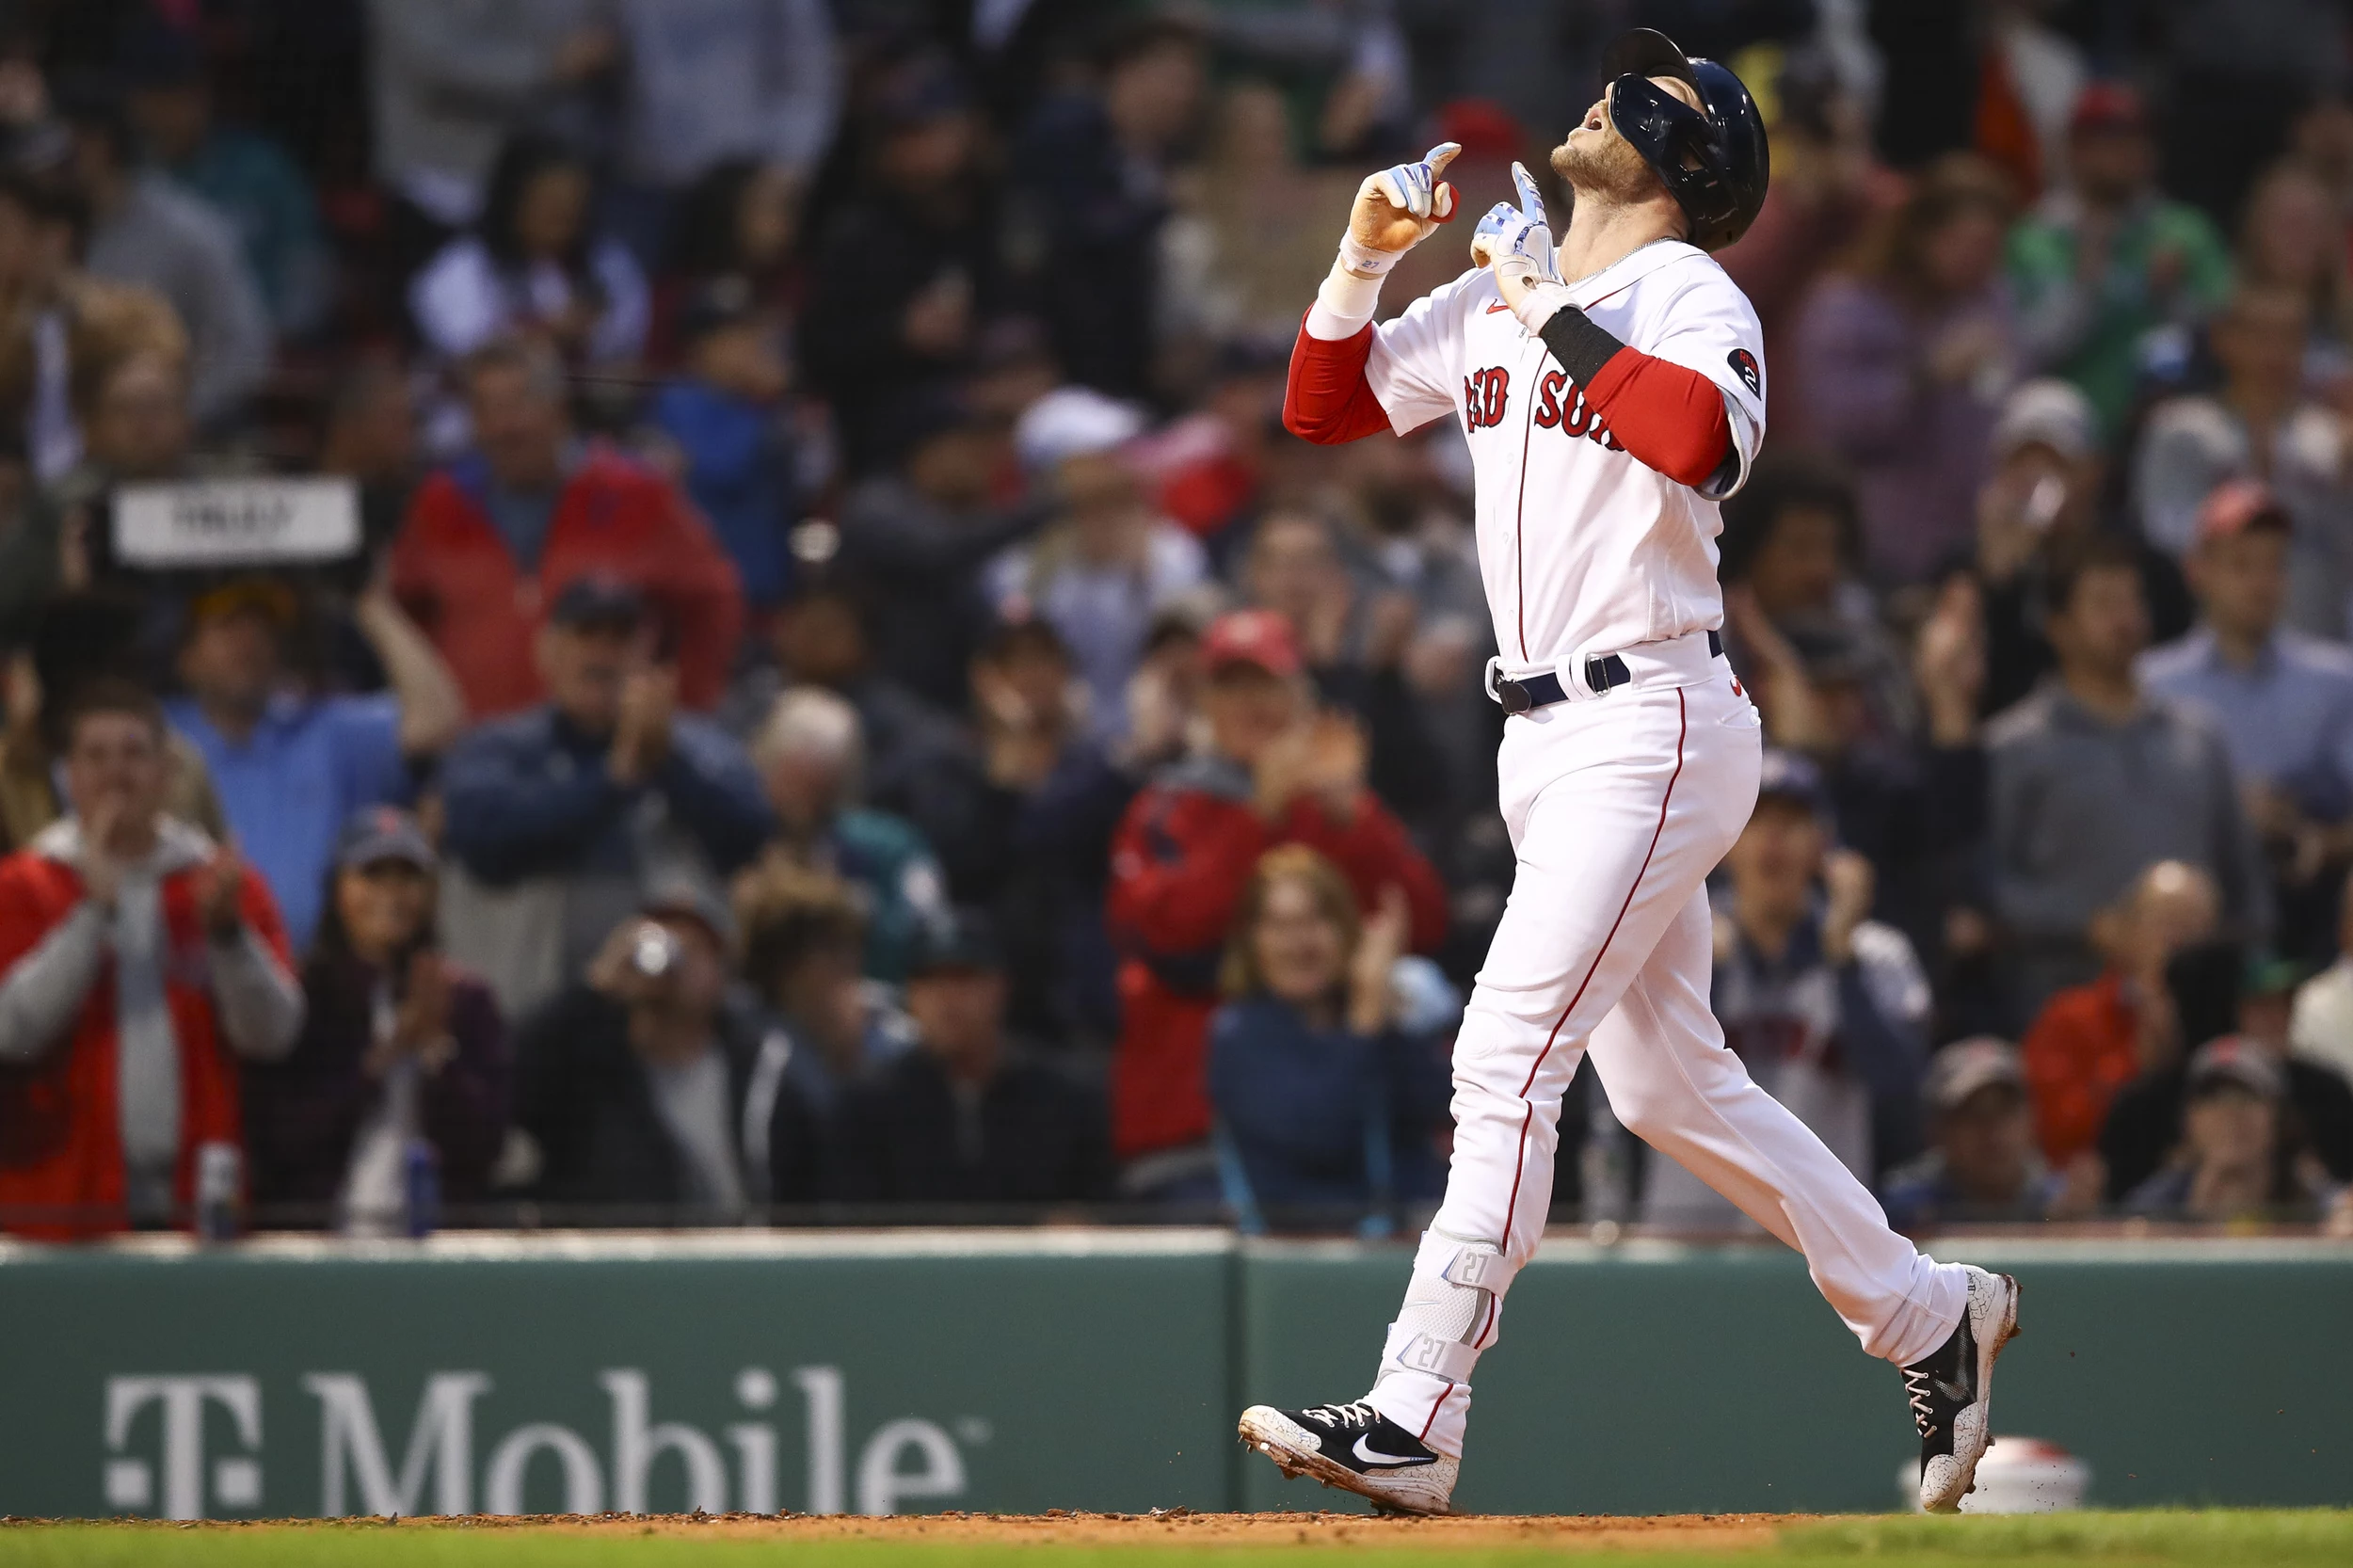 Trevor Story hits 3 home runs, Red Sox top Mariners 12-6